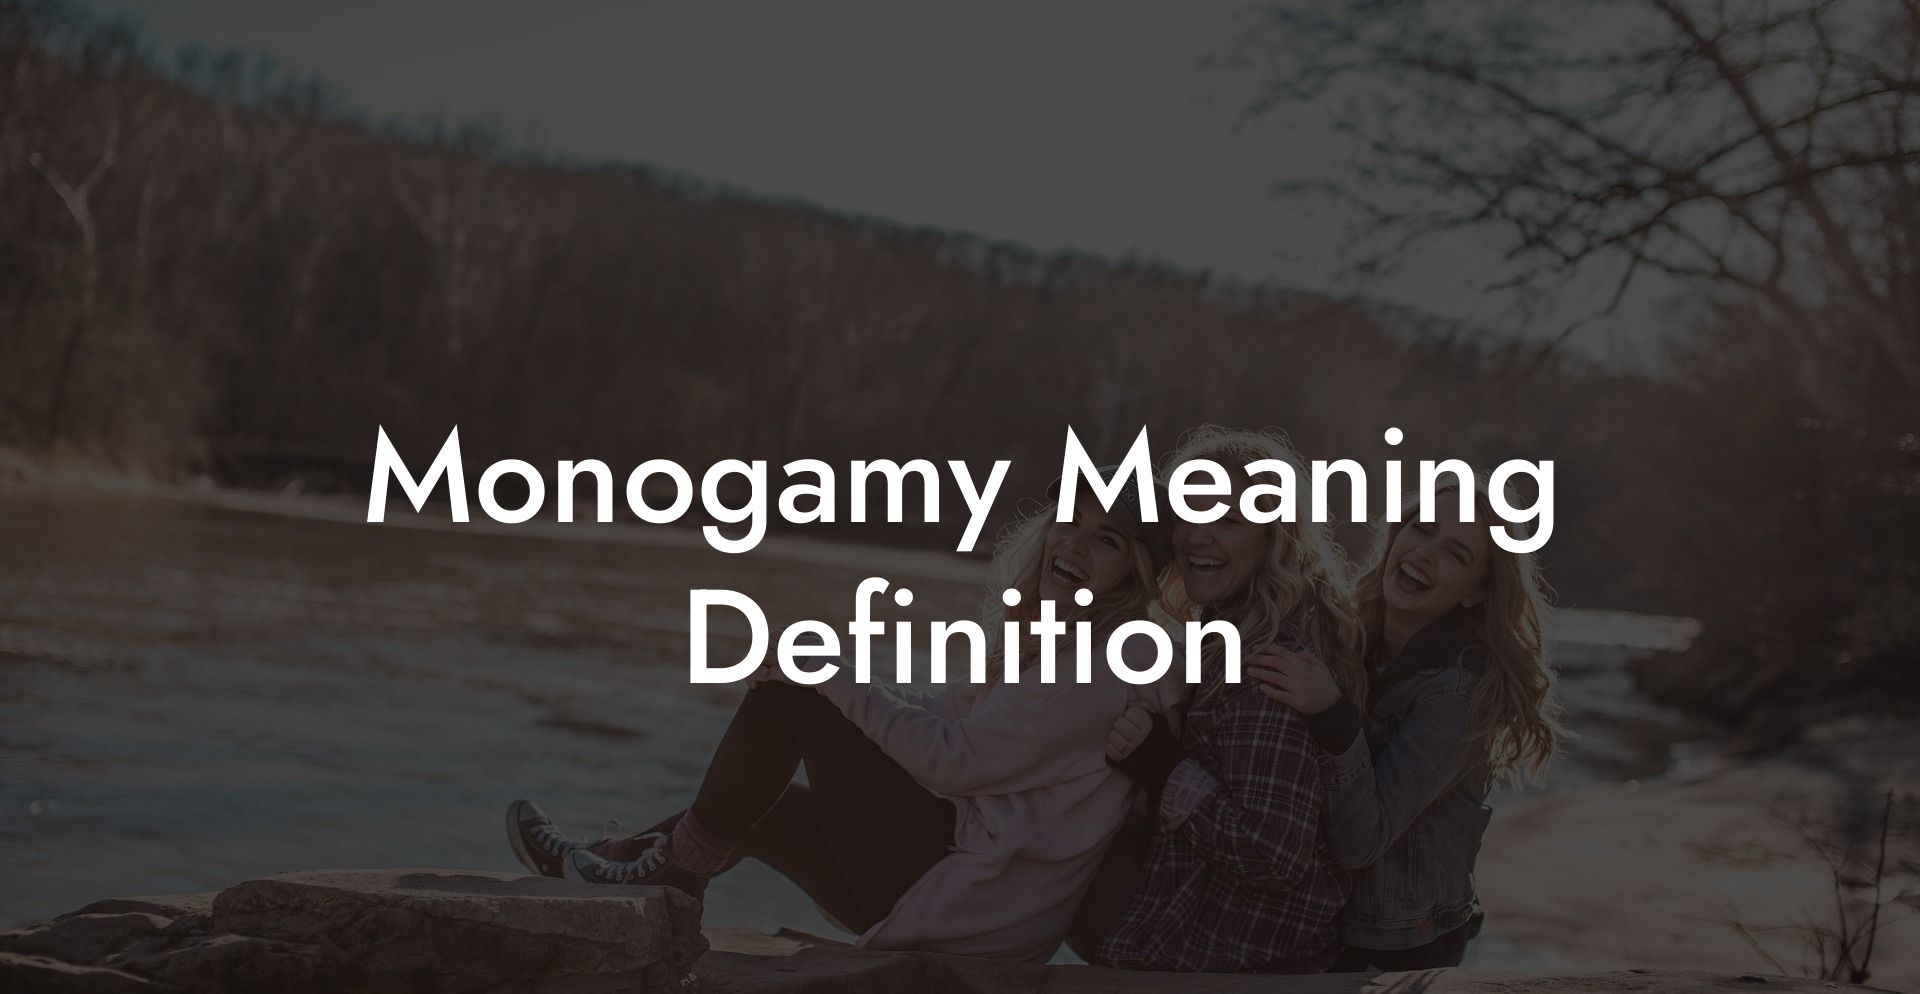 Monogamy Meaning Definition